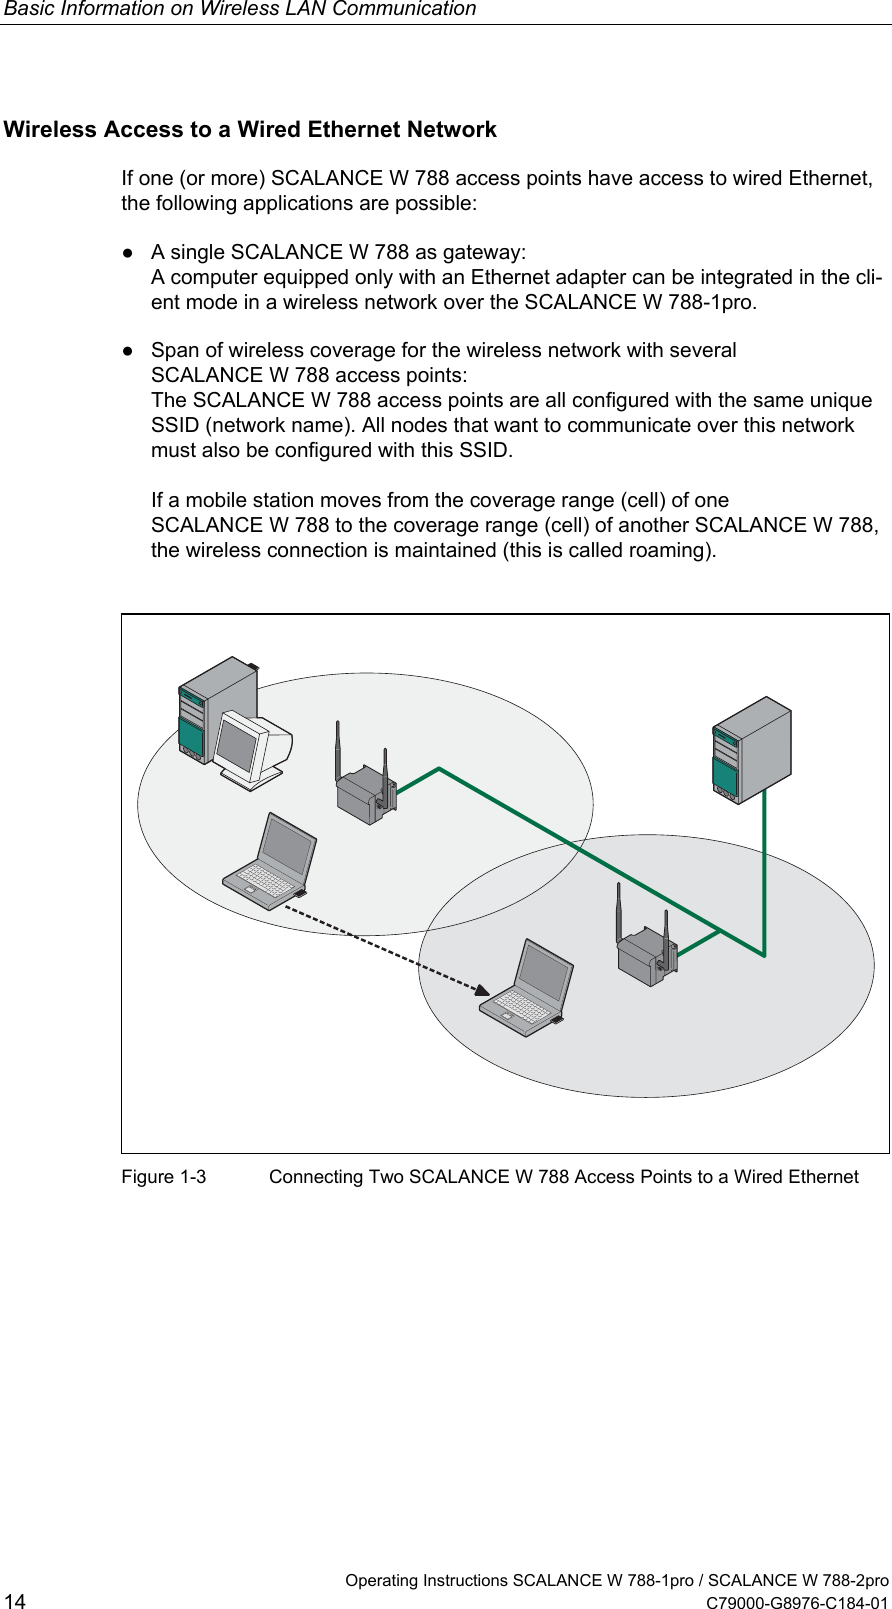 Basic Information on Wireless LAN Communication Wireless Access to a Wired Ethernet Network If one (or more) SCALANCE W 788 access points have access to wired Ethernet, the following applications are possible: ●  A single SCALANCE W 788 as gateway: A computer equipped only with an Ethernet adapter can be integrated in the cli-ent mode in a wireless network over the SCALANCE W 788-1pro. ●  Span of wireless coverage for the wireless network with several SCALANCE W 788 access points: The SCALANCE W 788 access points are all configured with the same unique SSID (network name). All nodes that want to communicate over this network must also be configured with this SSID.  If a mobile station moves from the coverage range (cell) of one SCALANCE W 788 to the coverage range (cell) of another SCALANCE W 788, the wireless connection is maintained (this is called roaming).   Figure 1-3  Connecting Two SCALANCE W 788 Access Points to a Wired Ethernet    Operating Instructions SCALANCE W 788-1pro / SCALANCE W 788-2pro 14  C79000-G8976-C184-01 